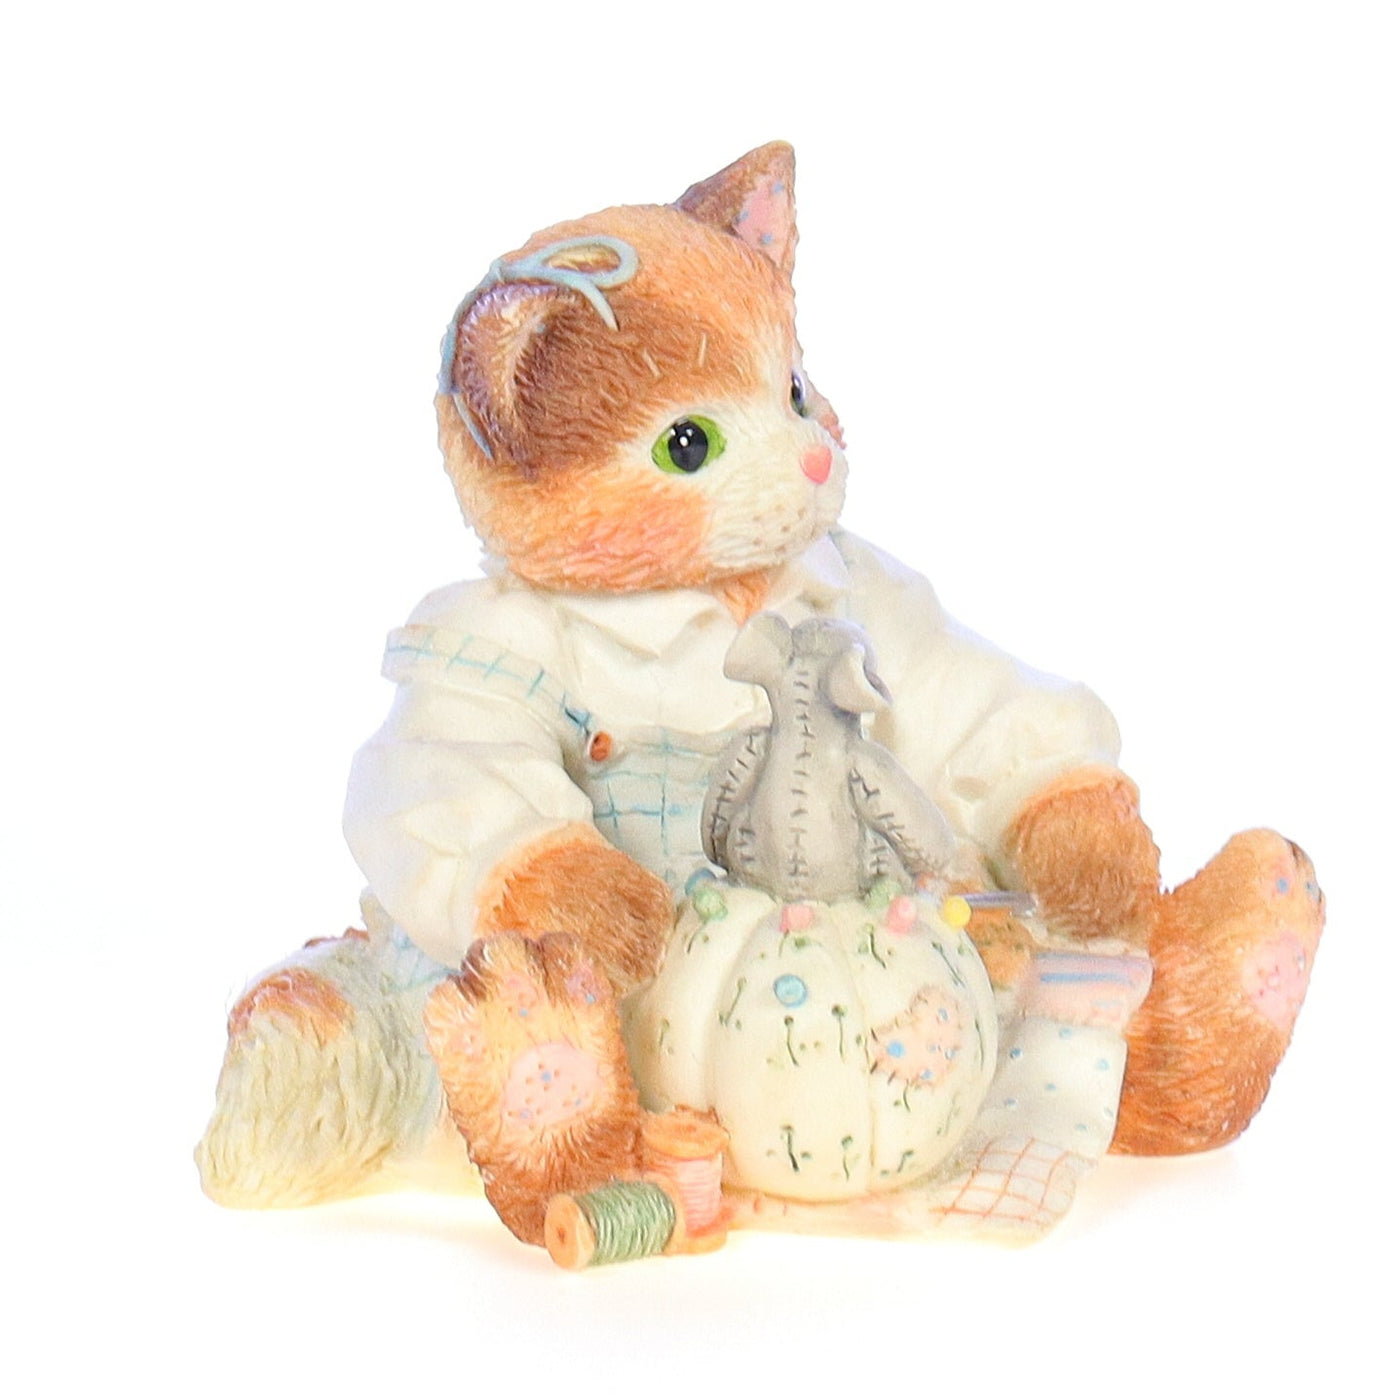 Calico_Kittens_Your_Patchwork_Charm_Shows_Through_Figurine_1994